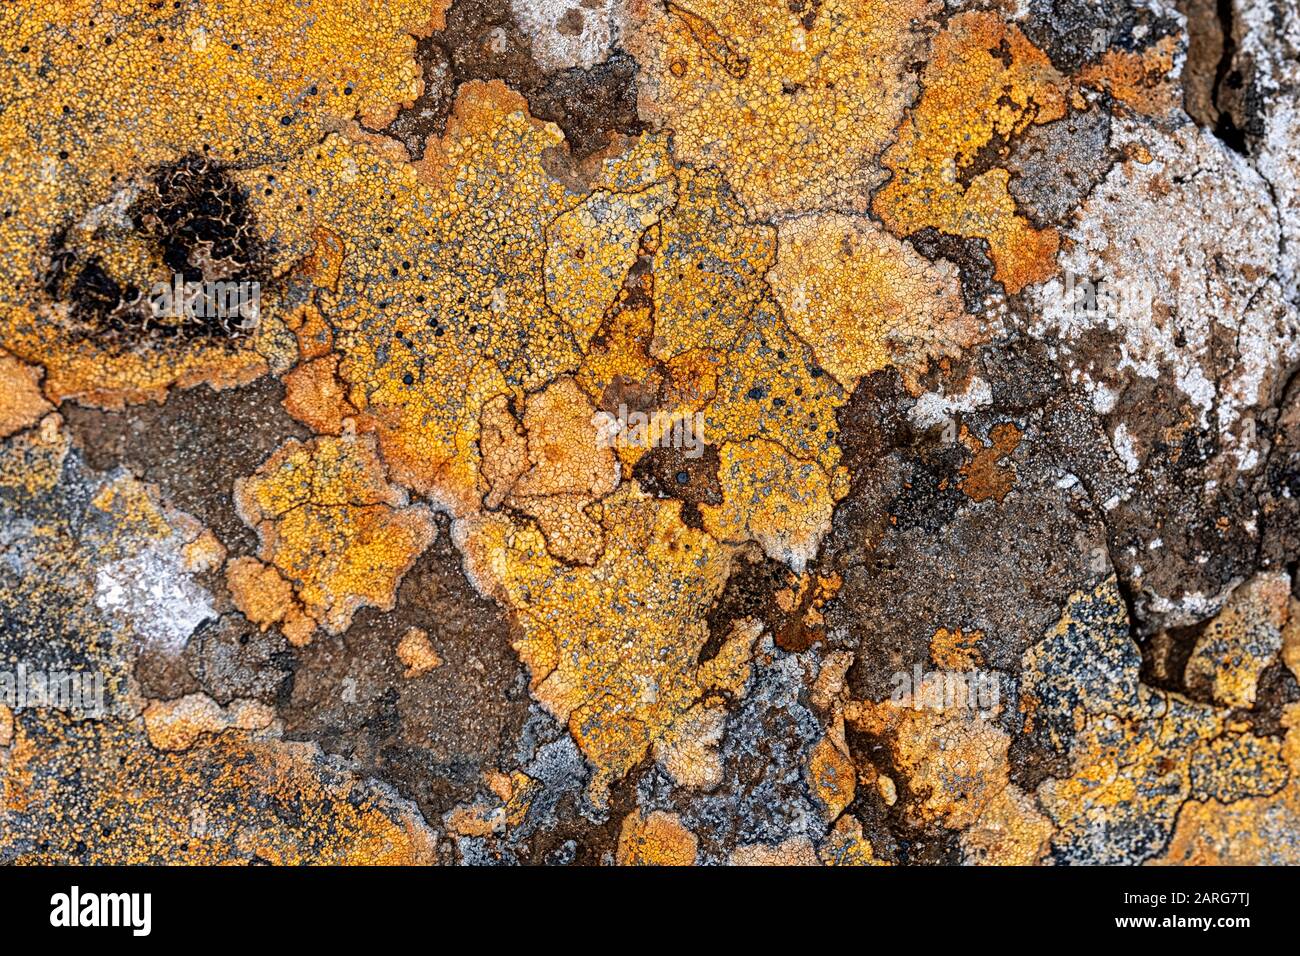 Colorful and abstract lichen formation on rocks Stock Photo